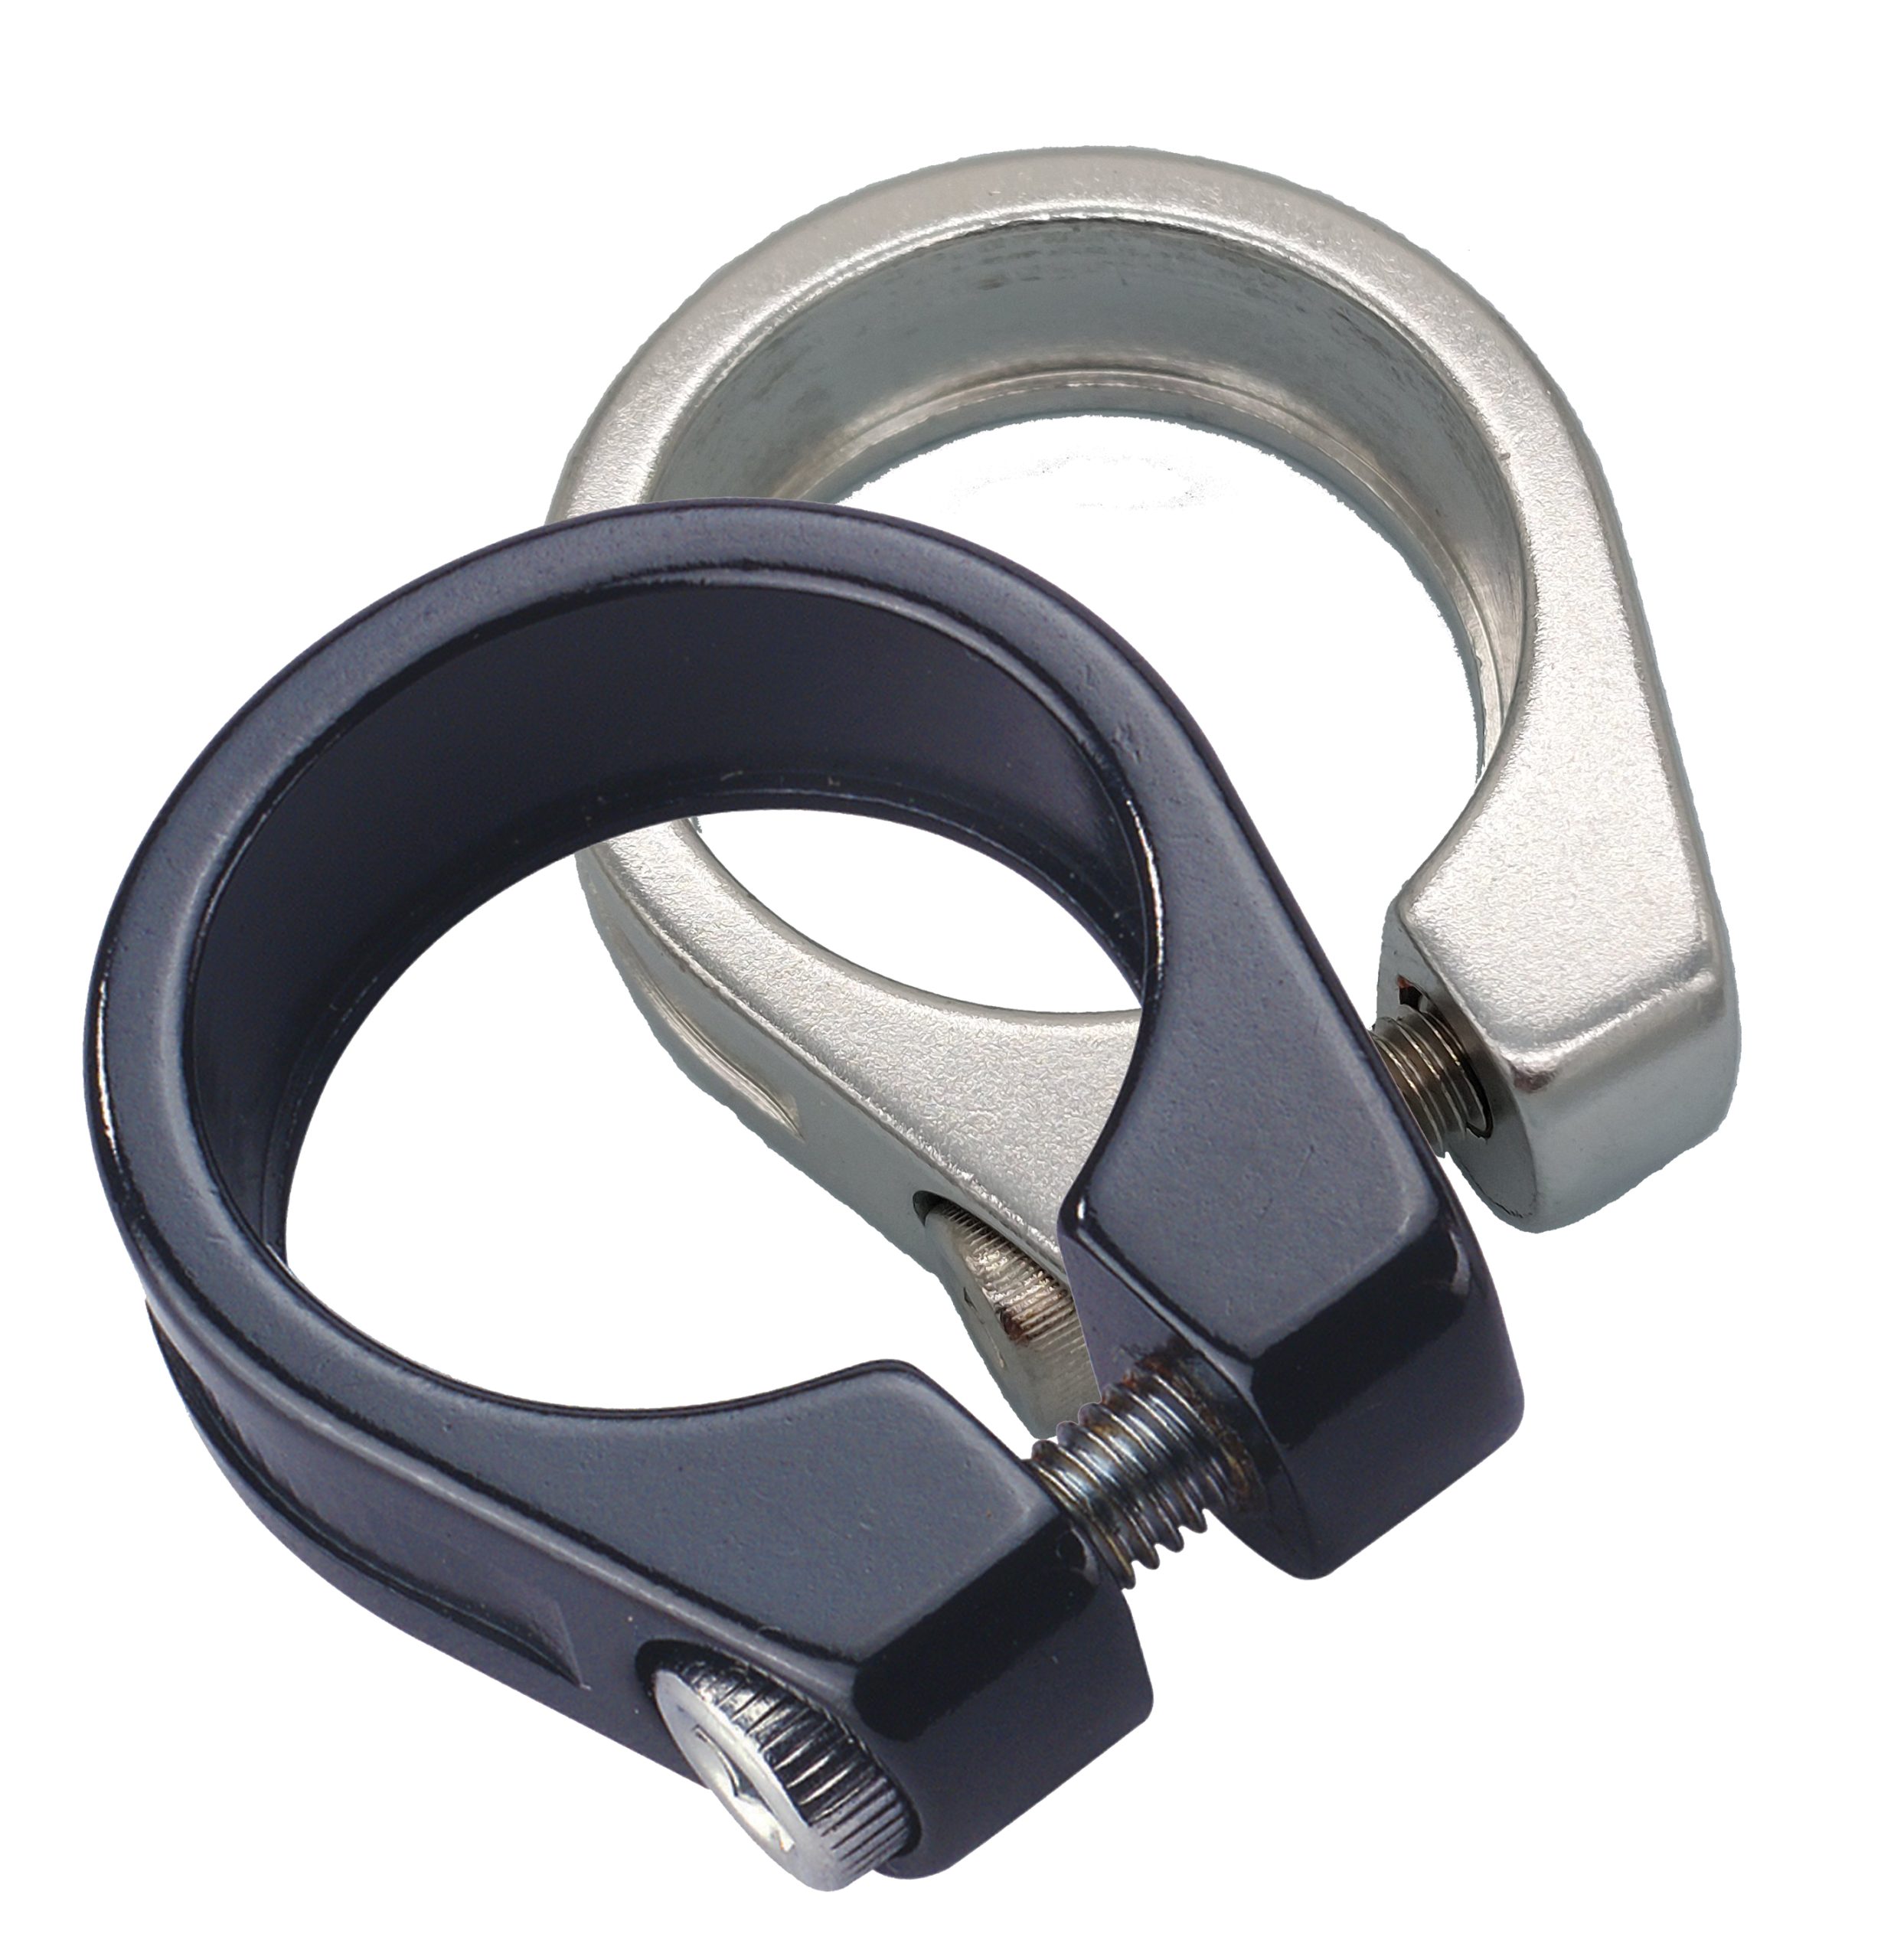 AQR23059Z Acor Black 34.9mm Forged Alloy Bolt Seat Clamp